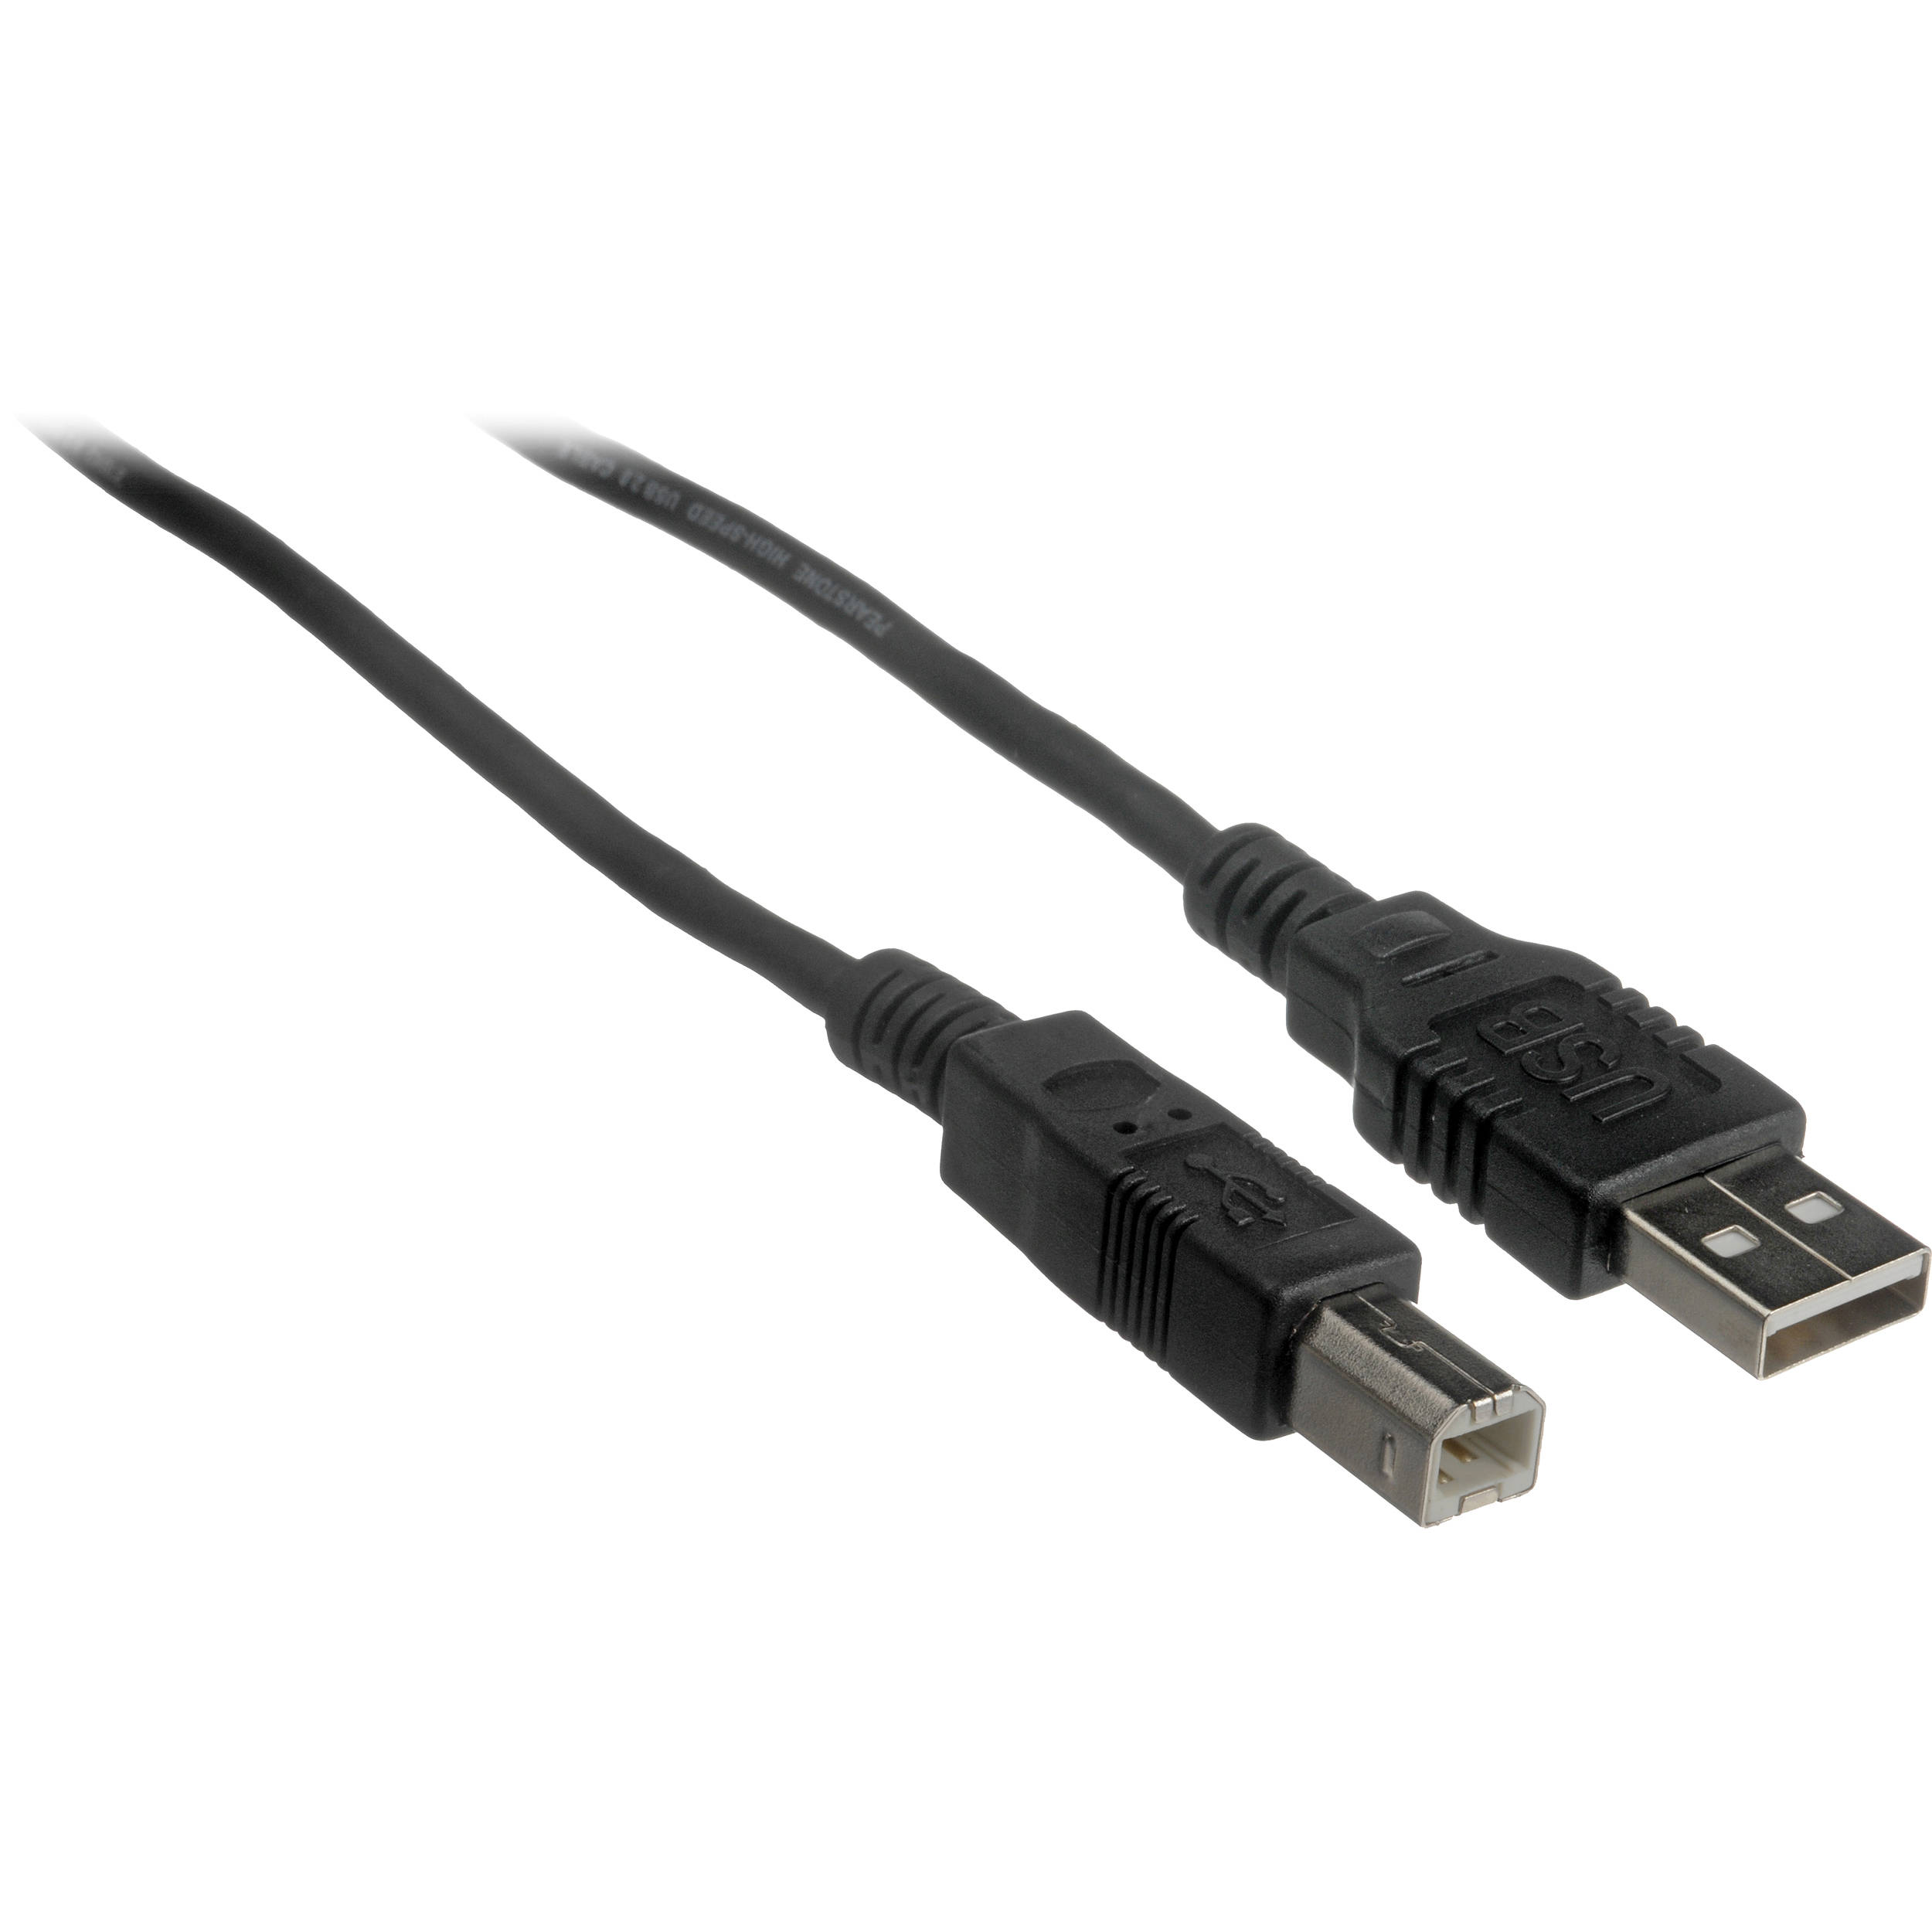 Pearstone USB 2.0 Type-A Male to Type-B Male Cable (6 ft)